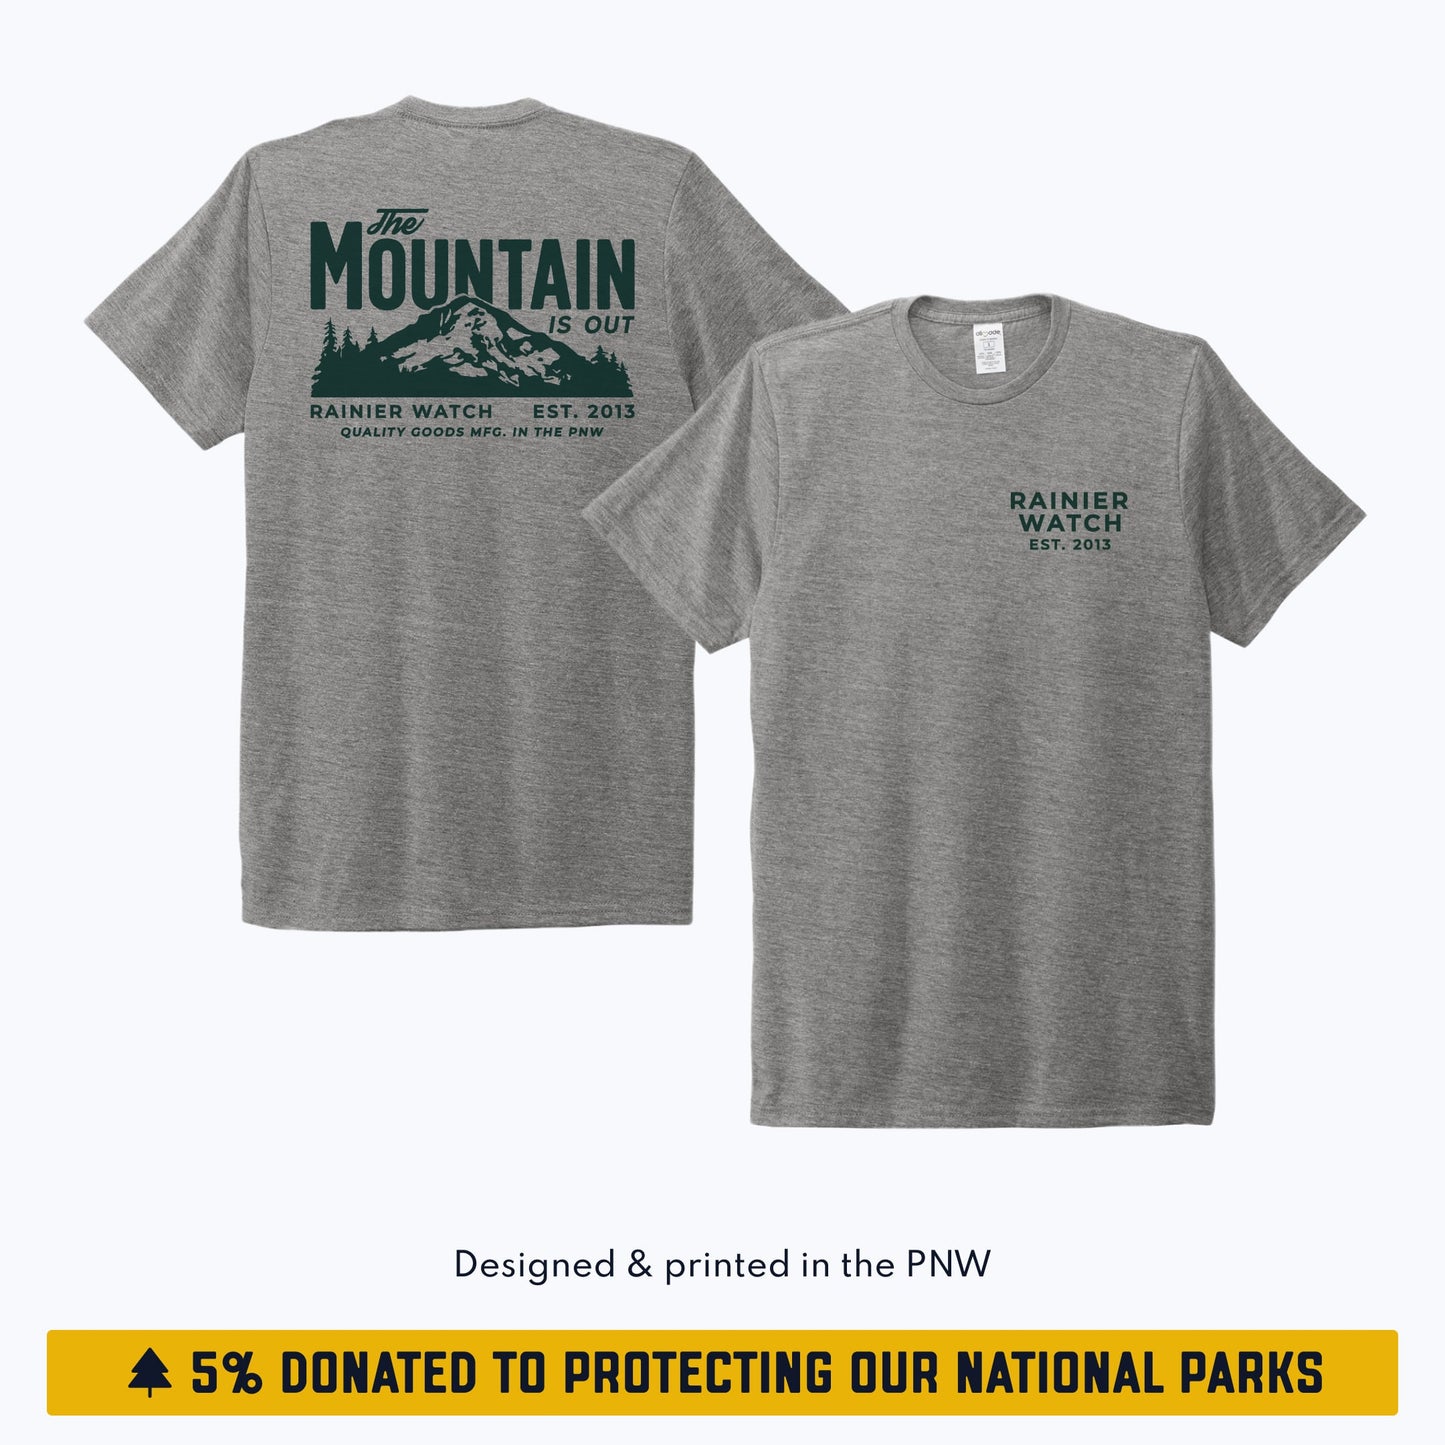 The Mountain Is Out Eco Tee